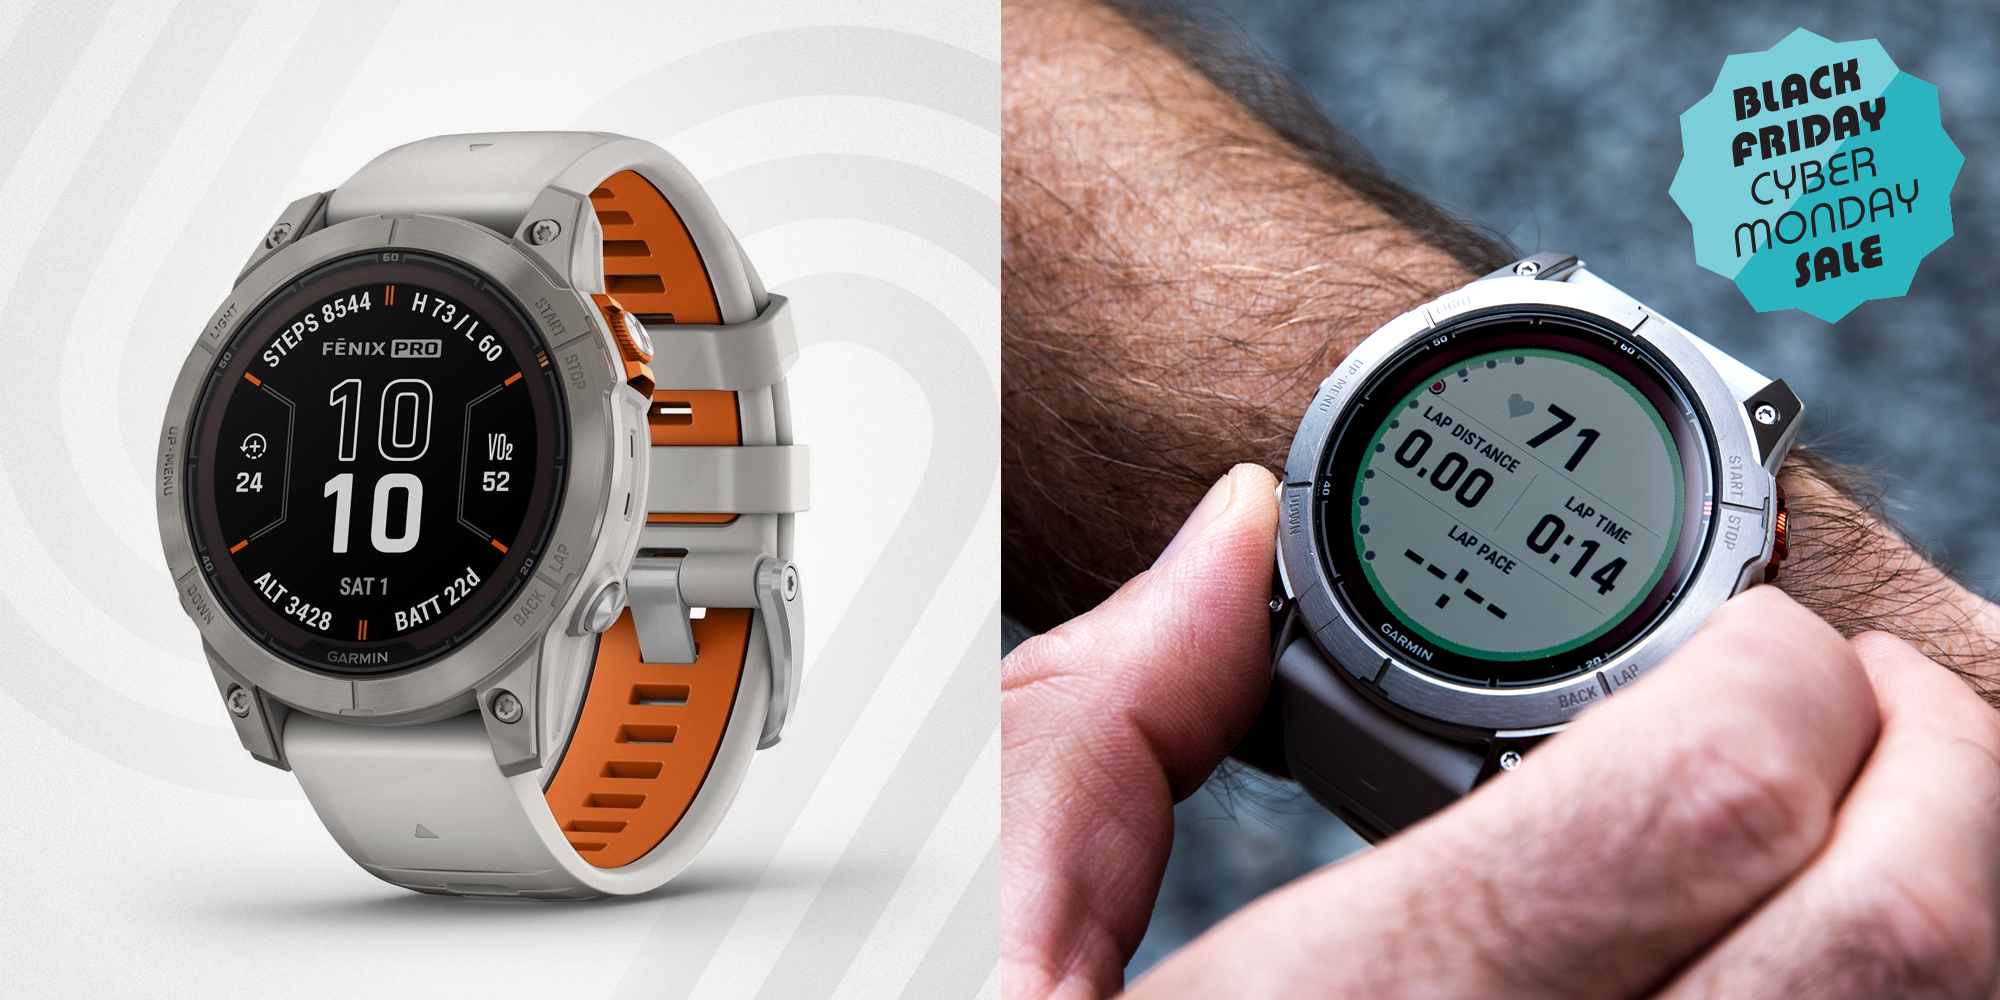 Garmin's Forerunner 255 and 745 are the same cheap Cyber Monday